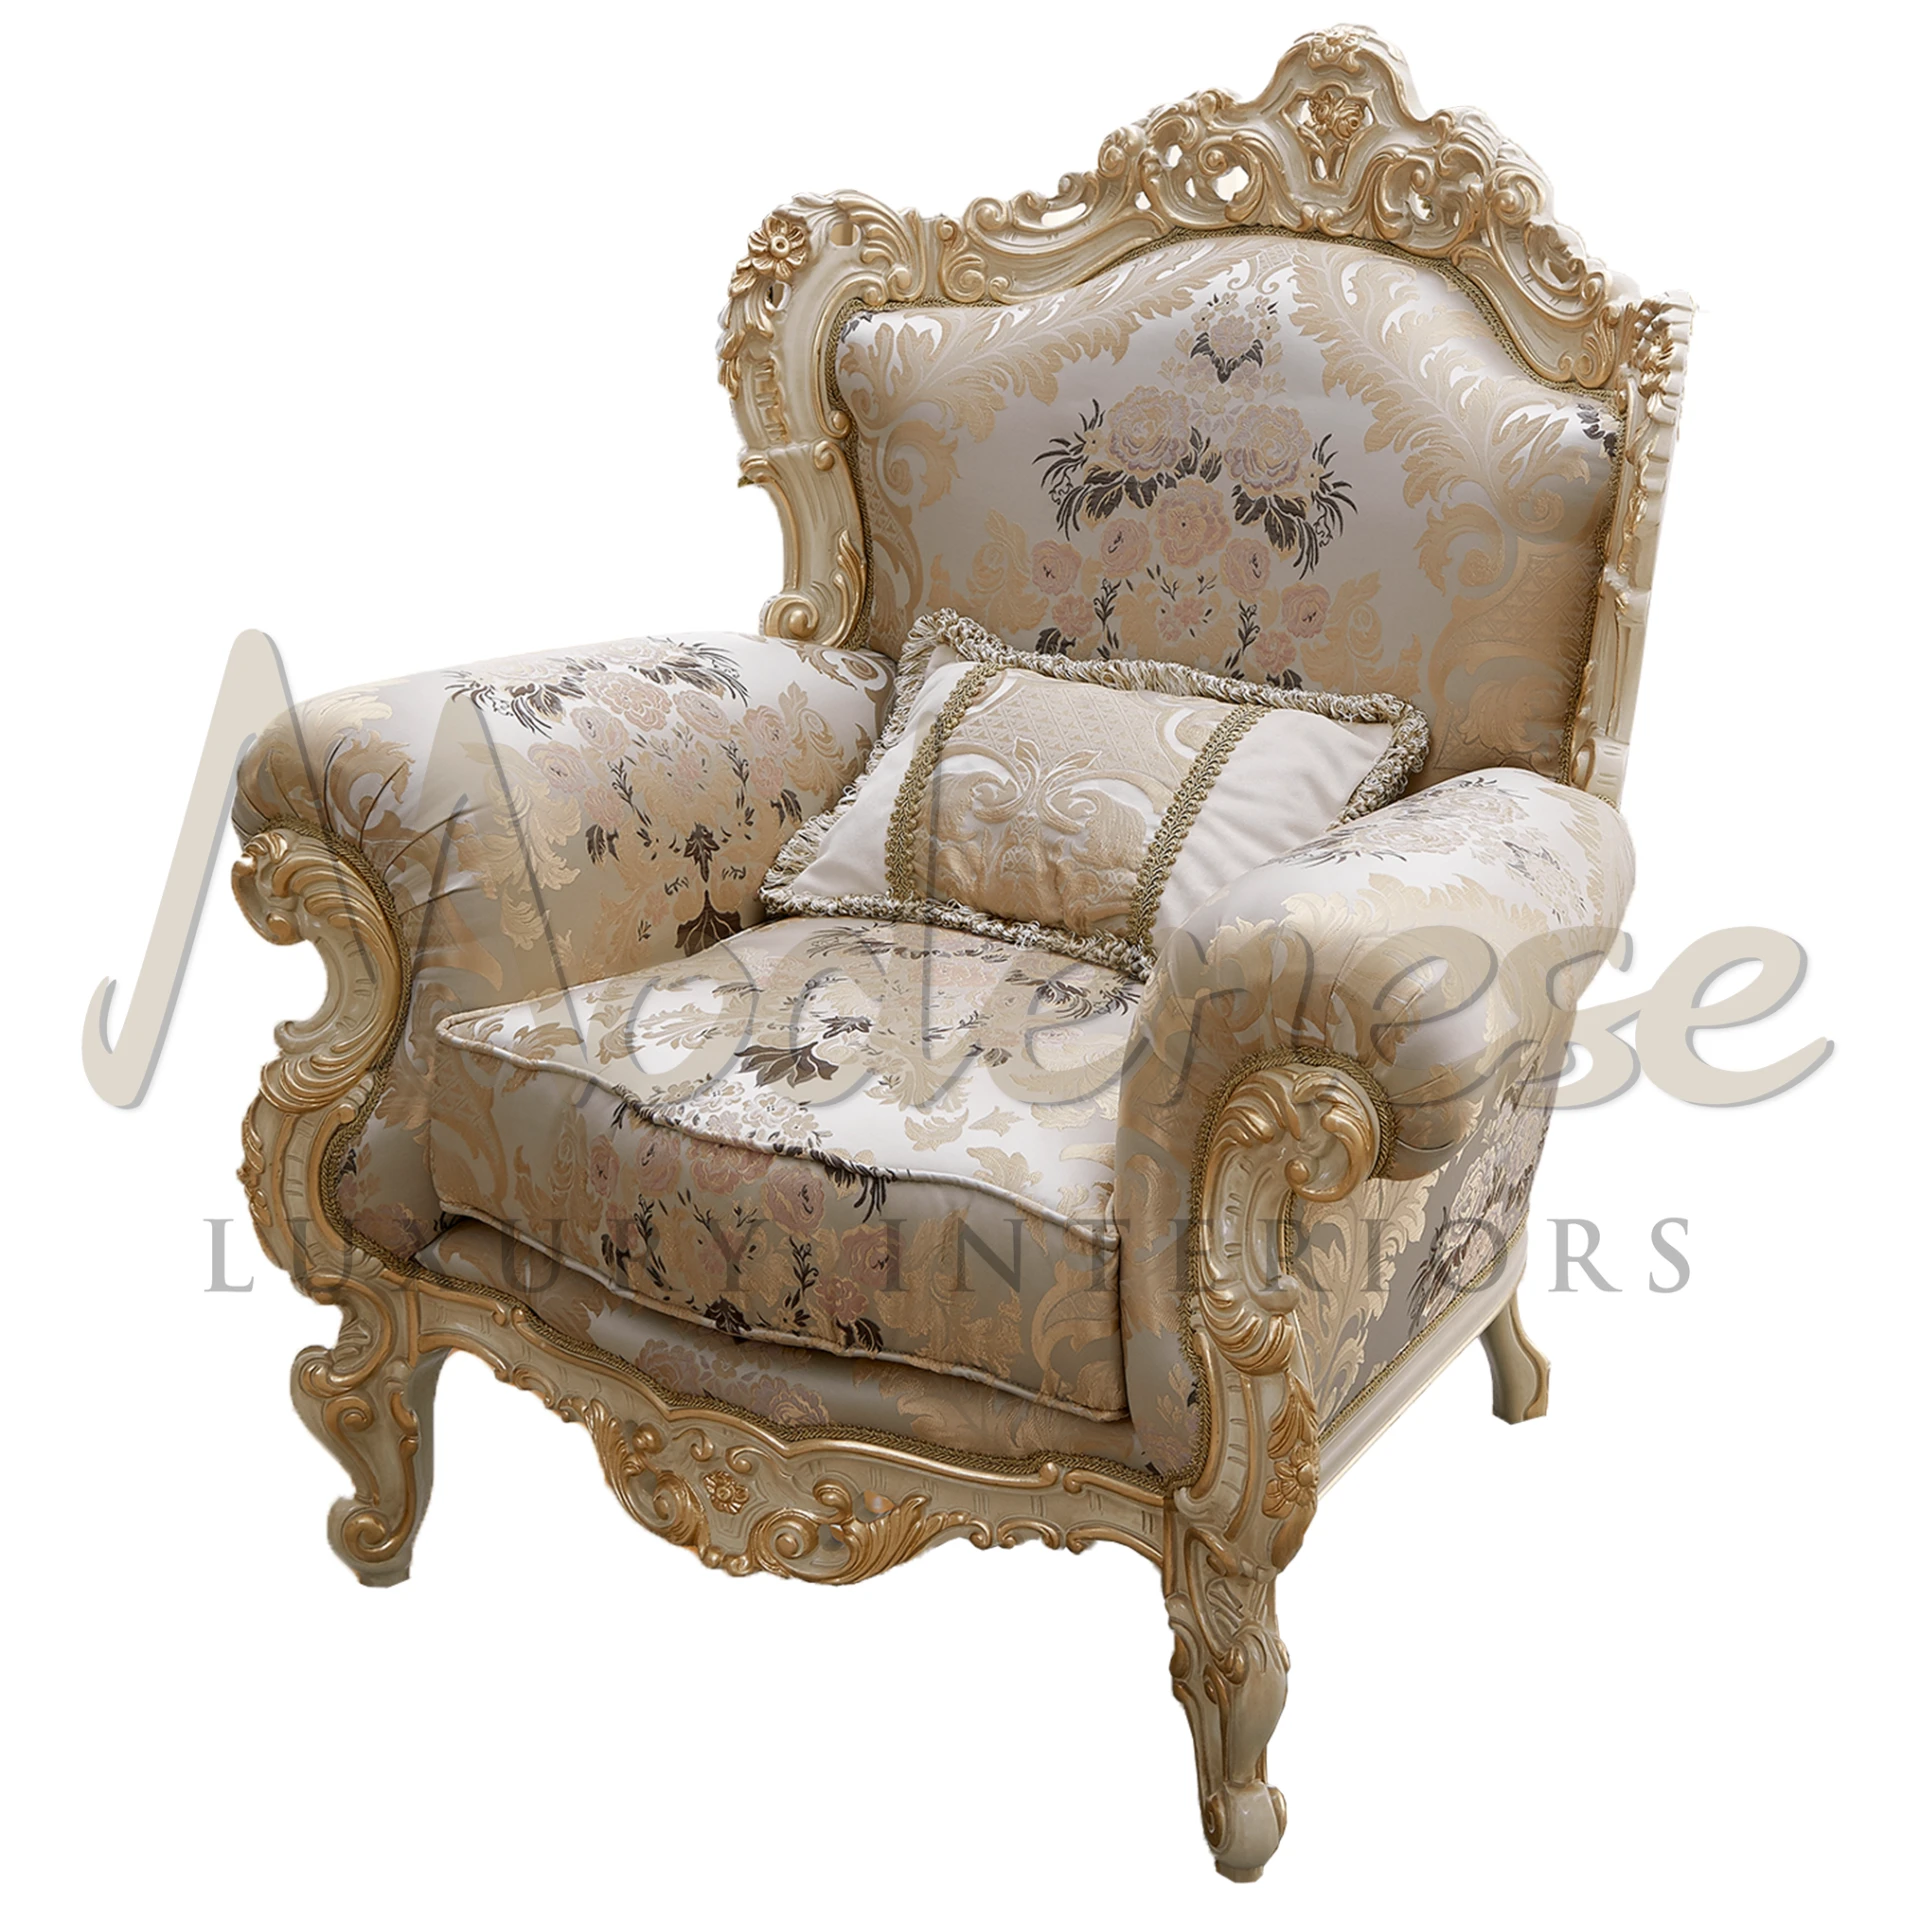 Luxurious Baroque Upholstered Armchair with unique flower design and elegant mixed fabric for a sophisticated interior.